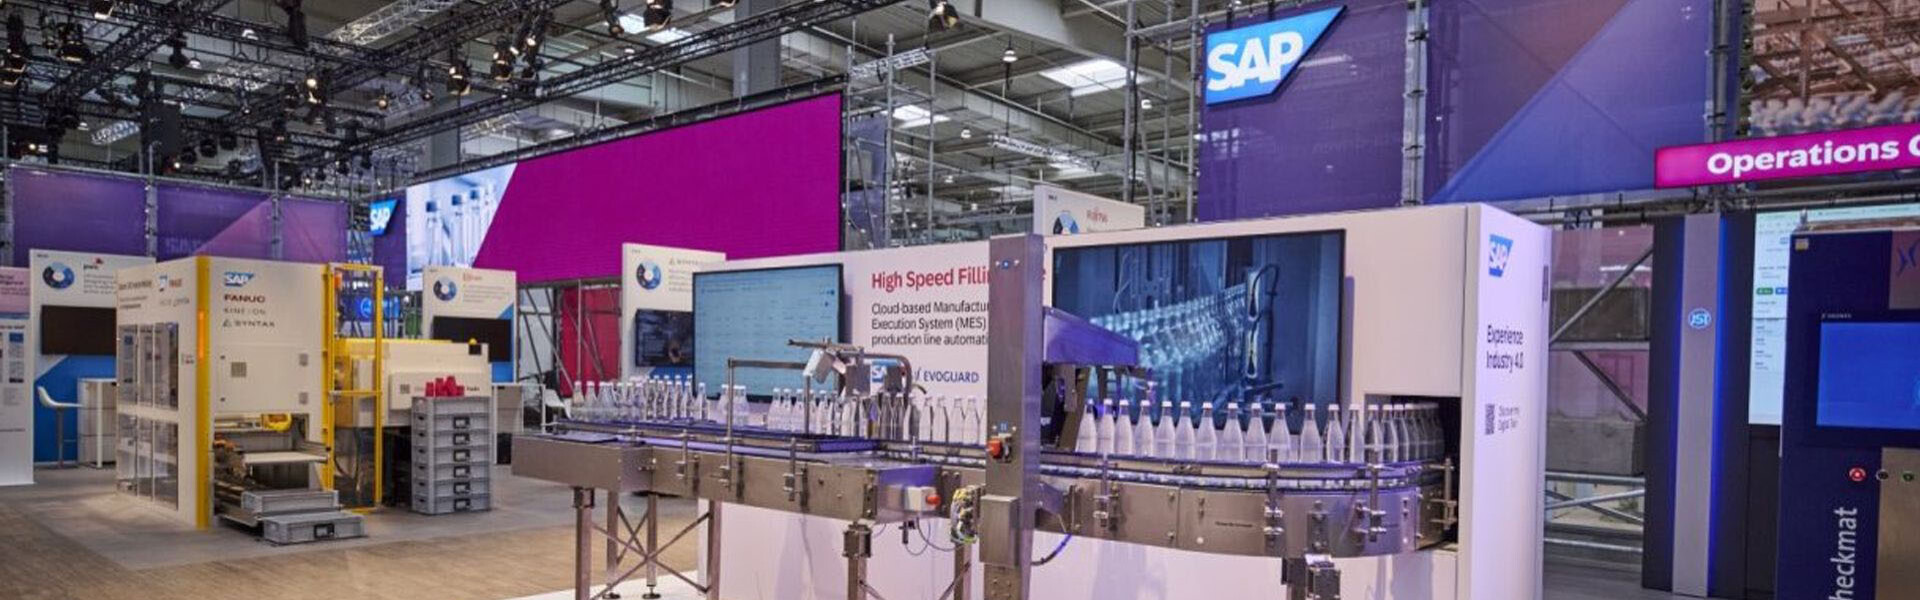 Hannover Messe: What Can AI Do for Manufacturing?